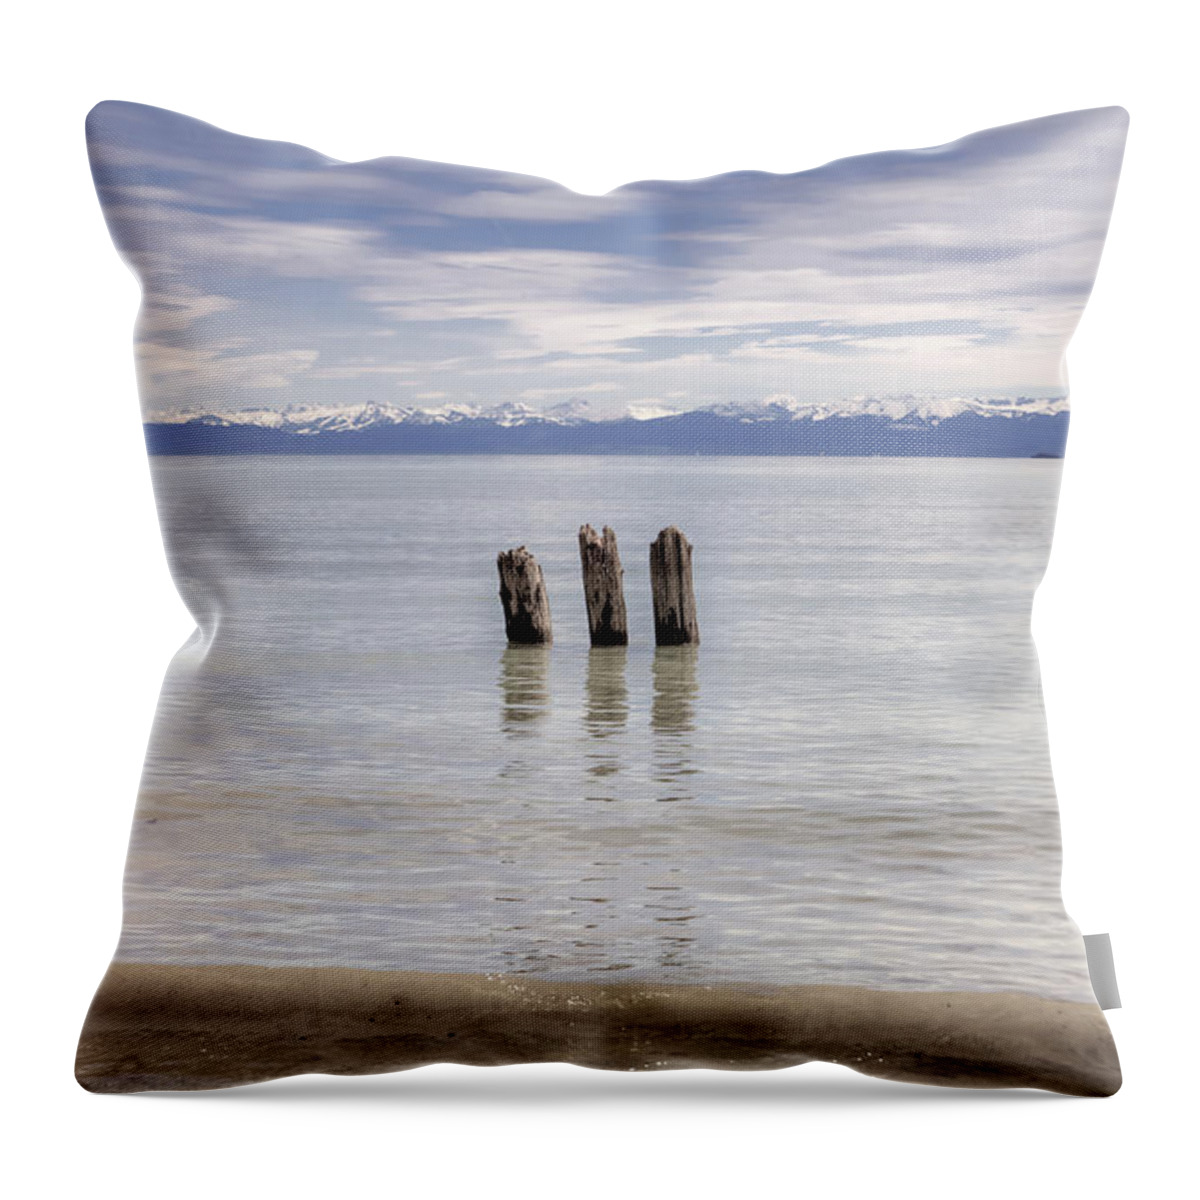 Wood Pile Throw Pillow featuring the photograph Lake Constance #2 by Joana Kruse